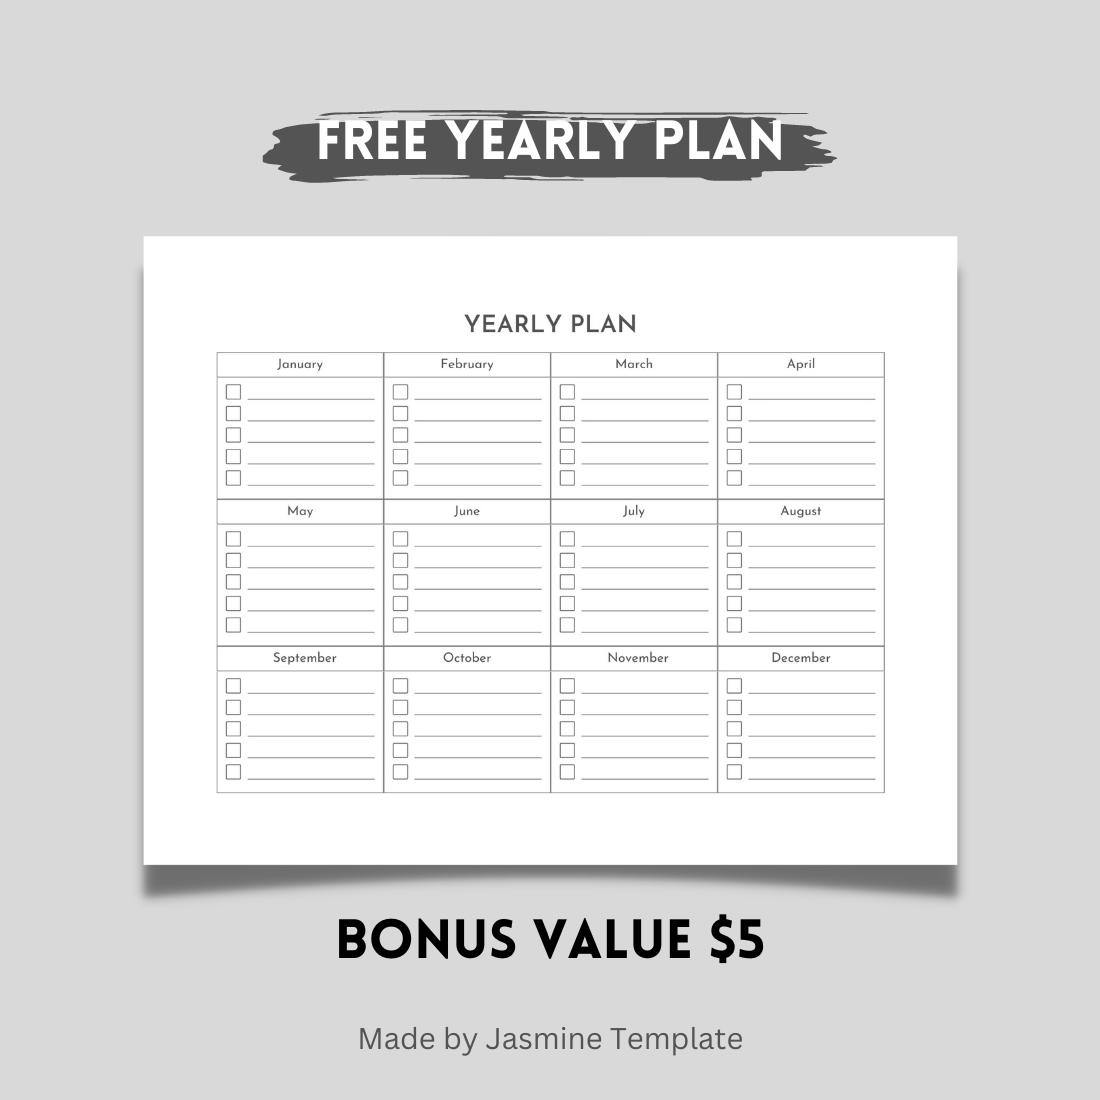 Simple yearly plan.